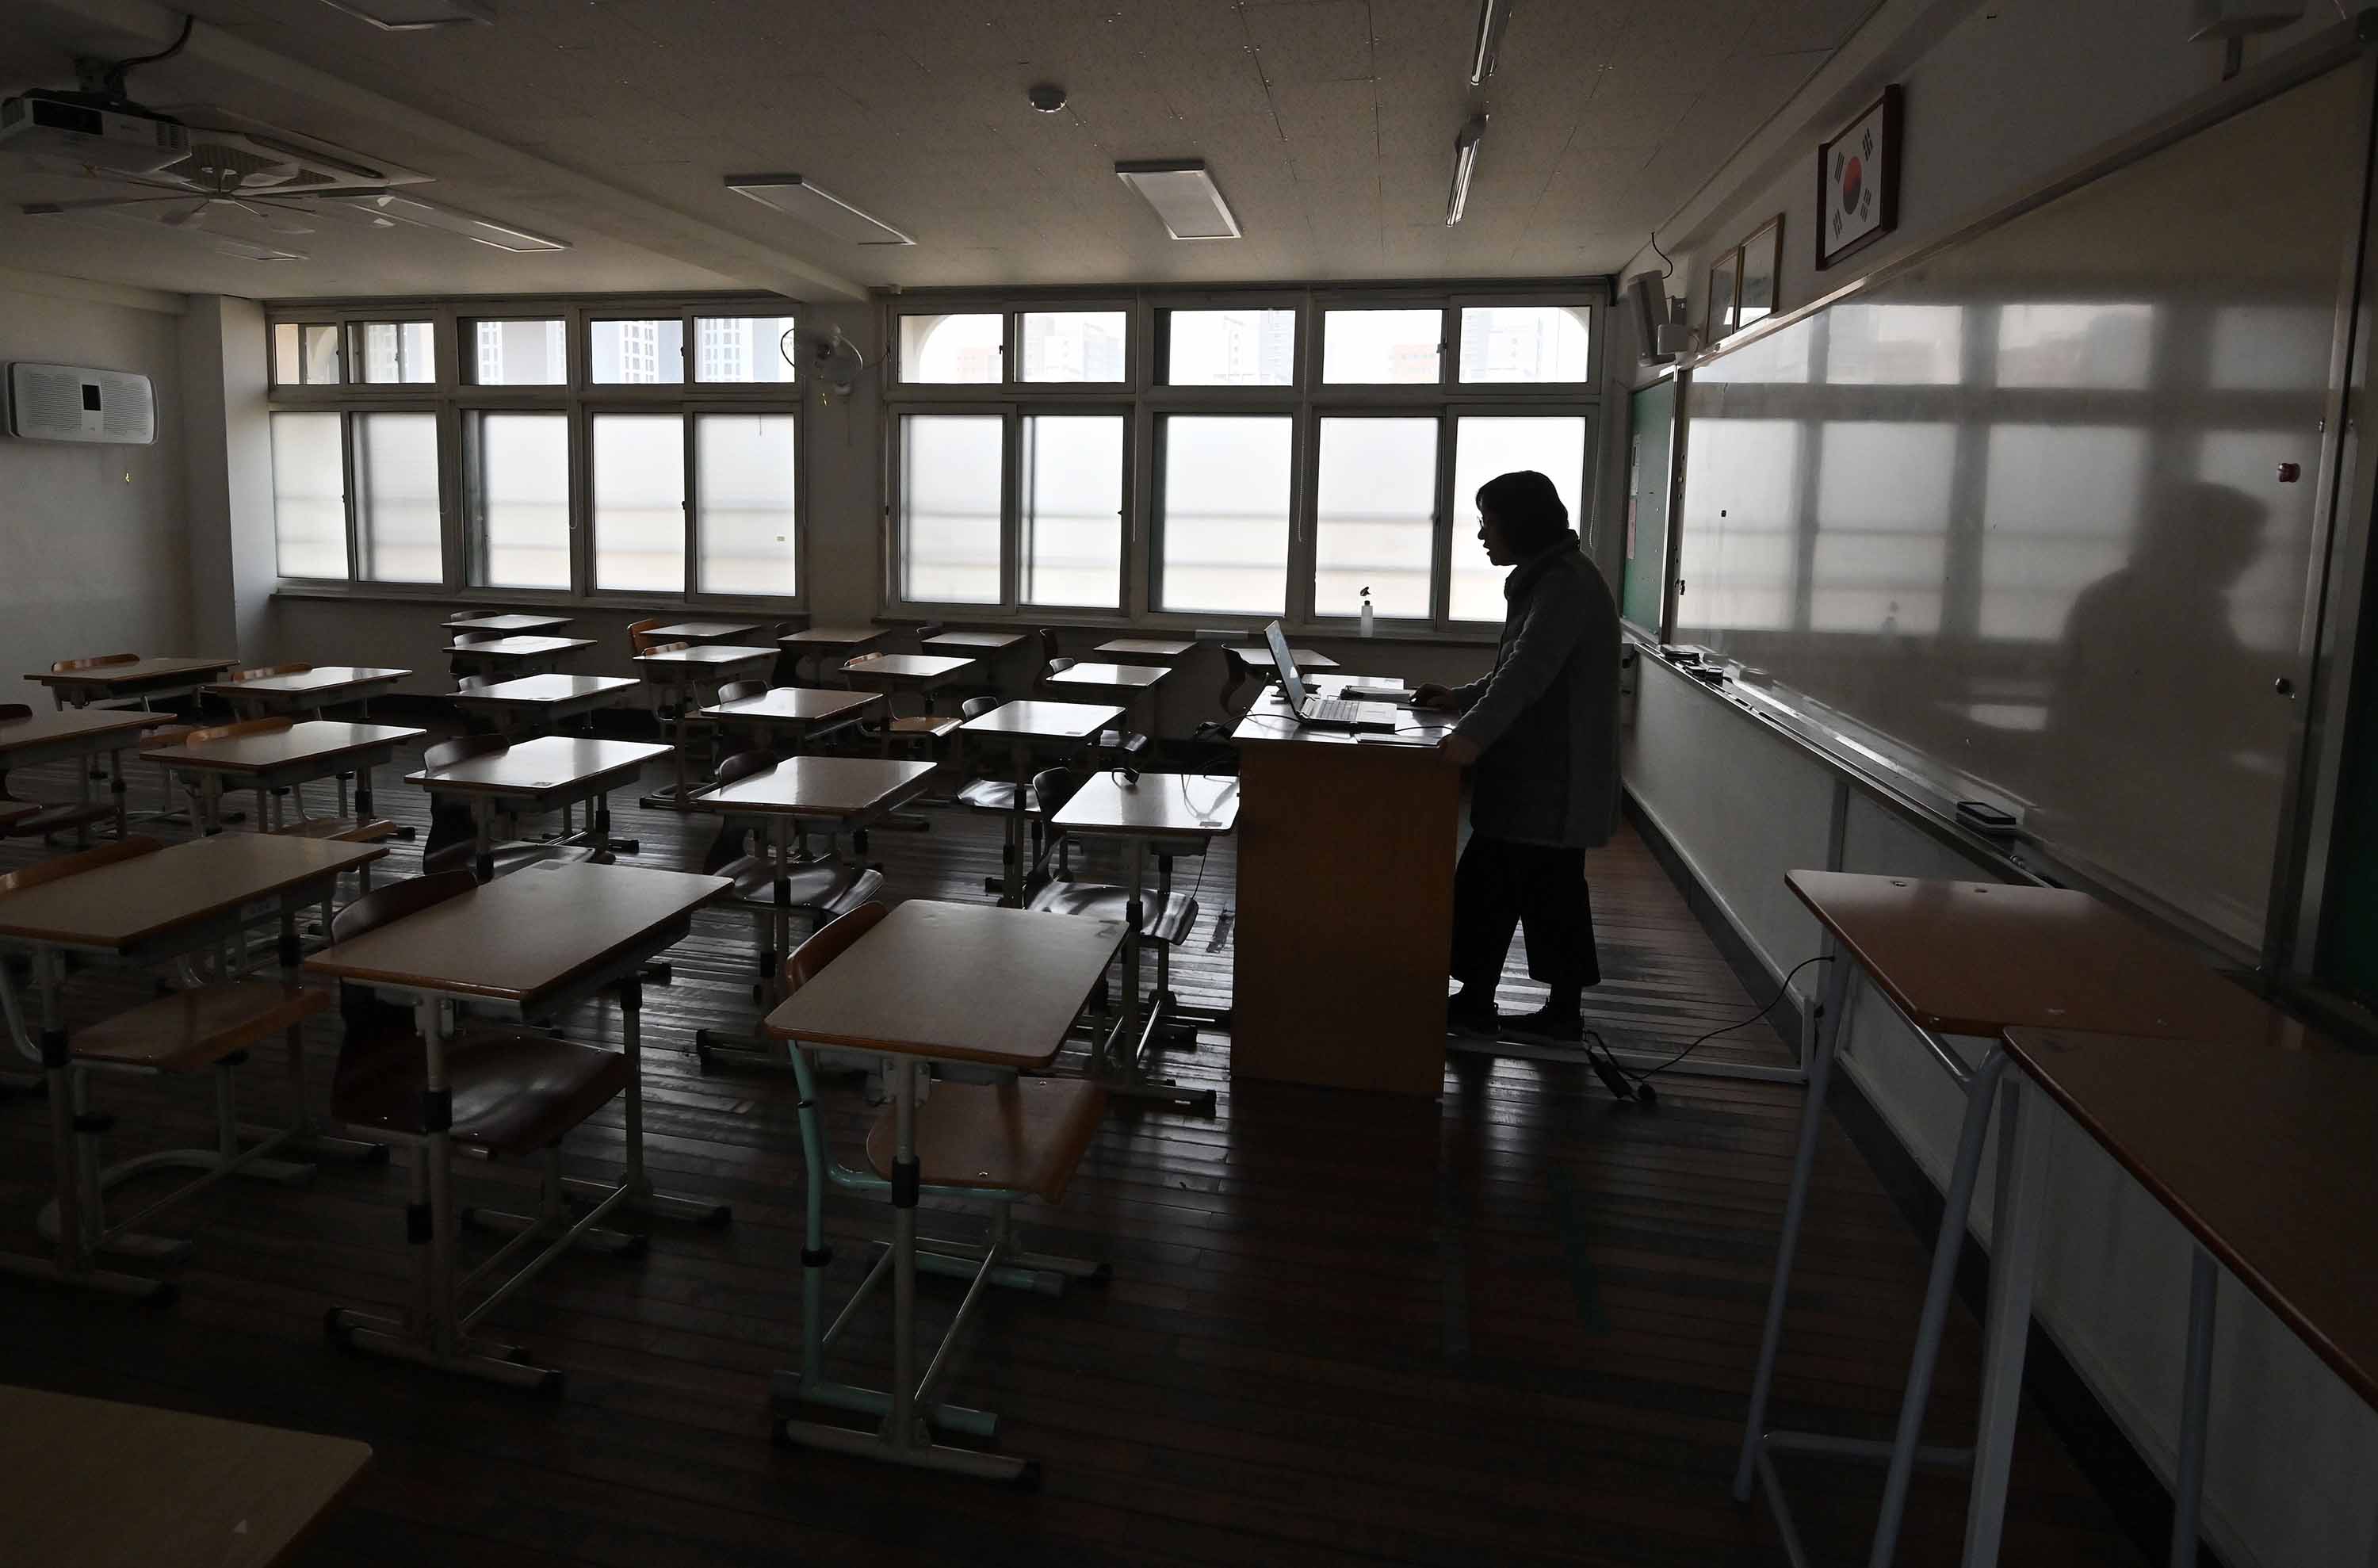 A teacher gives an online class lecture at Seoul Girls' High School in Seoul, South Korea, on April 9.